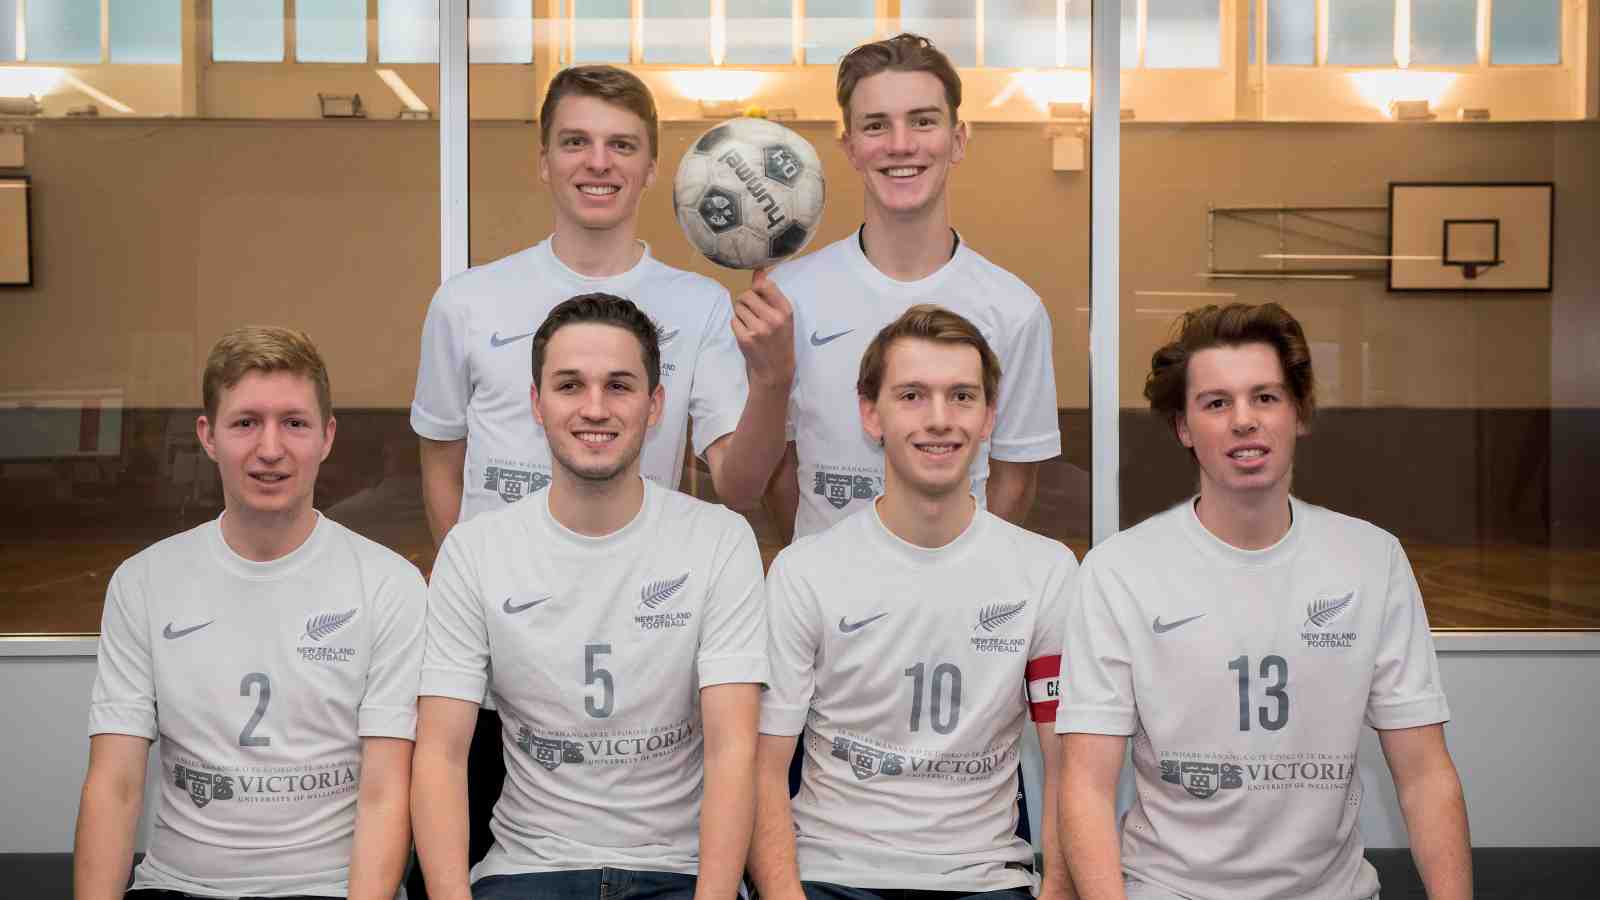 New Zealand Men's University Futsal Team who competed at the World Champs in Brazil in July 2016.